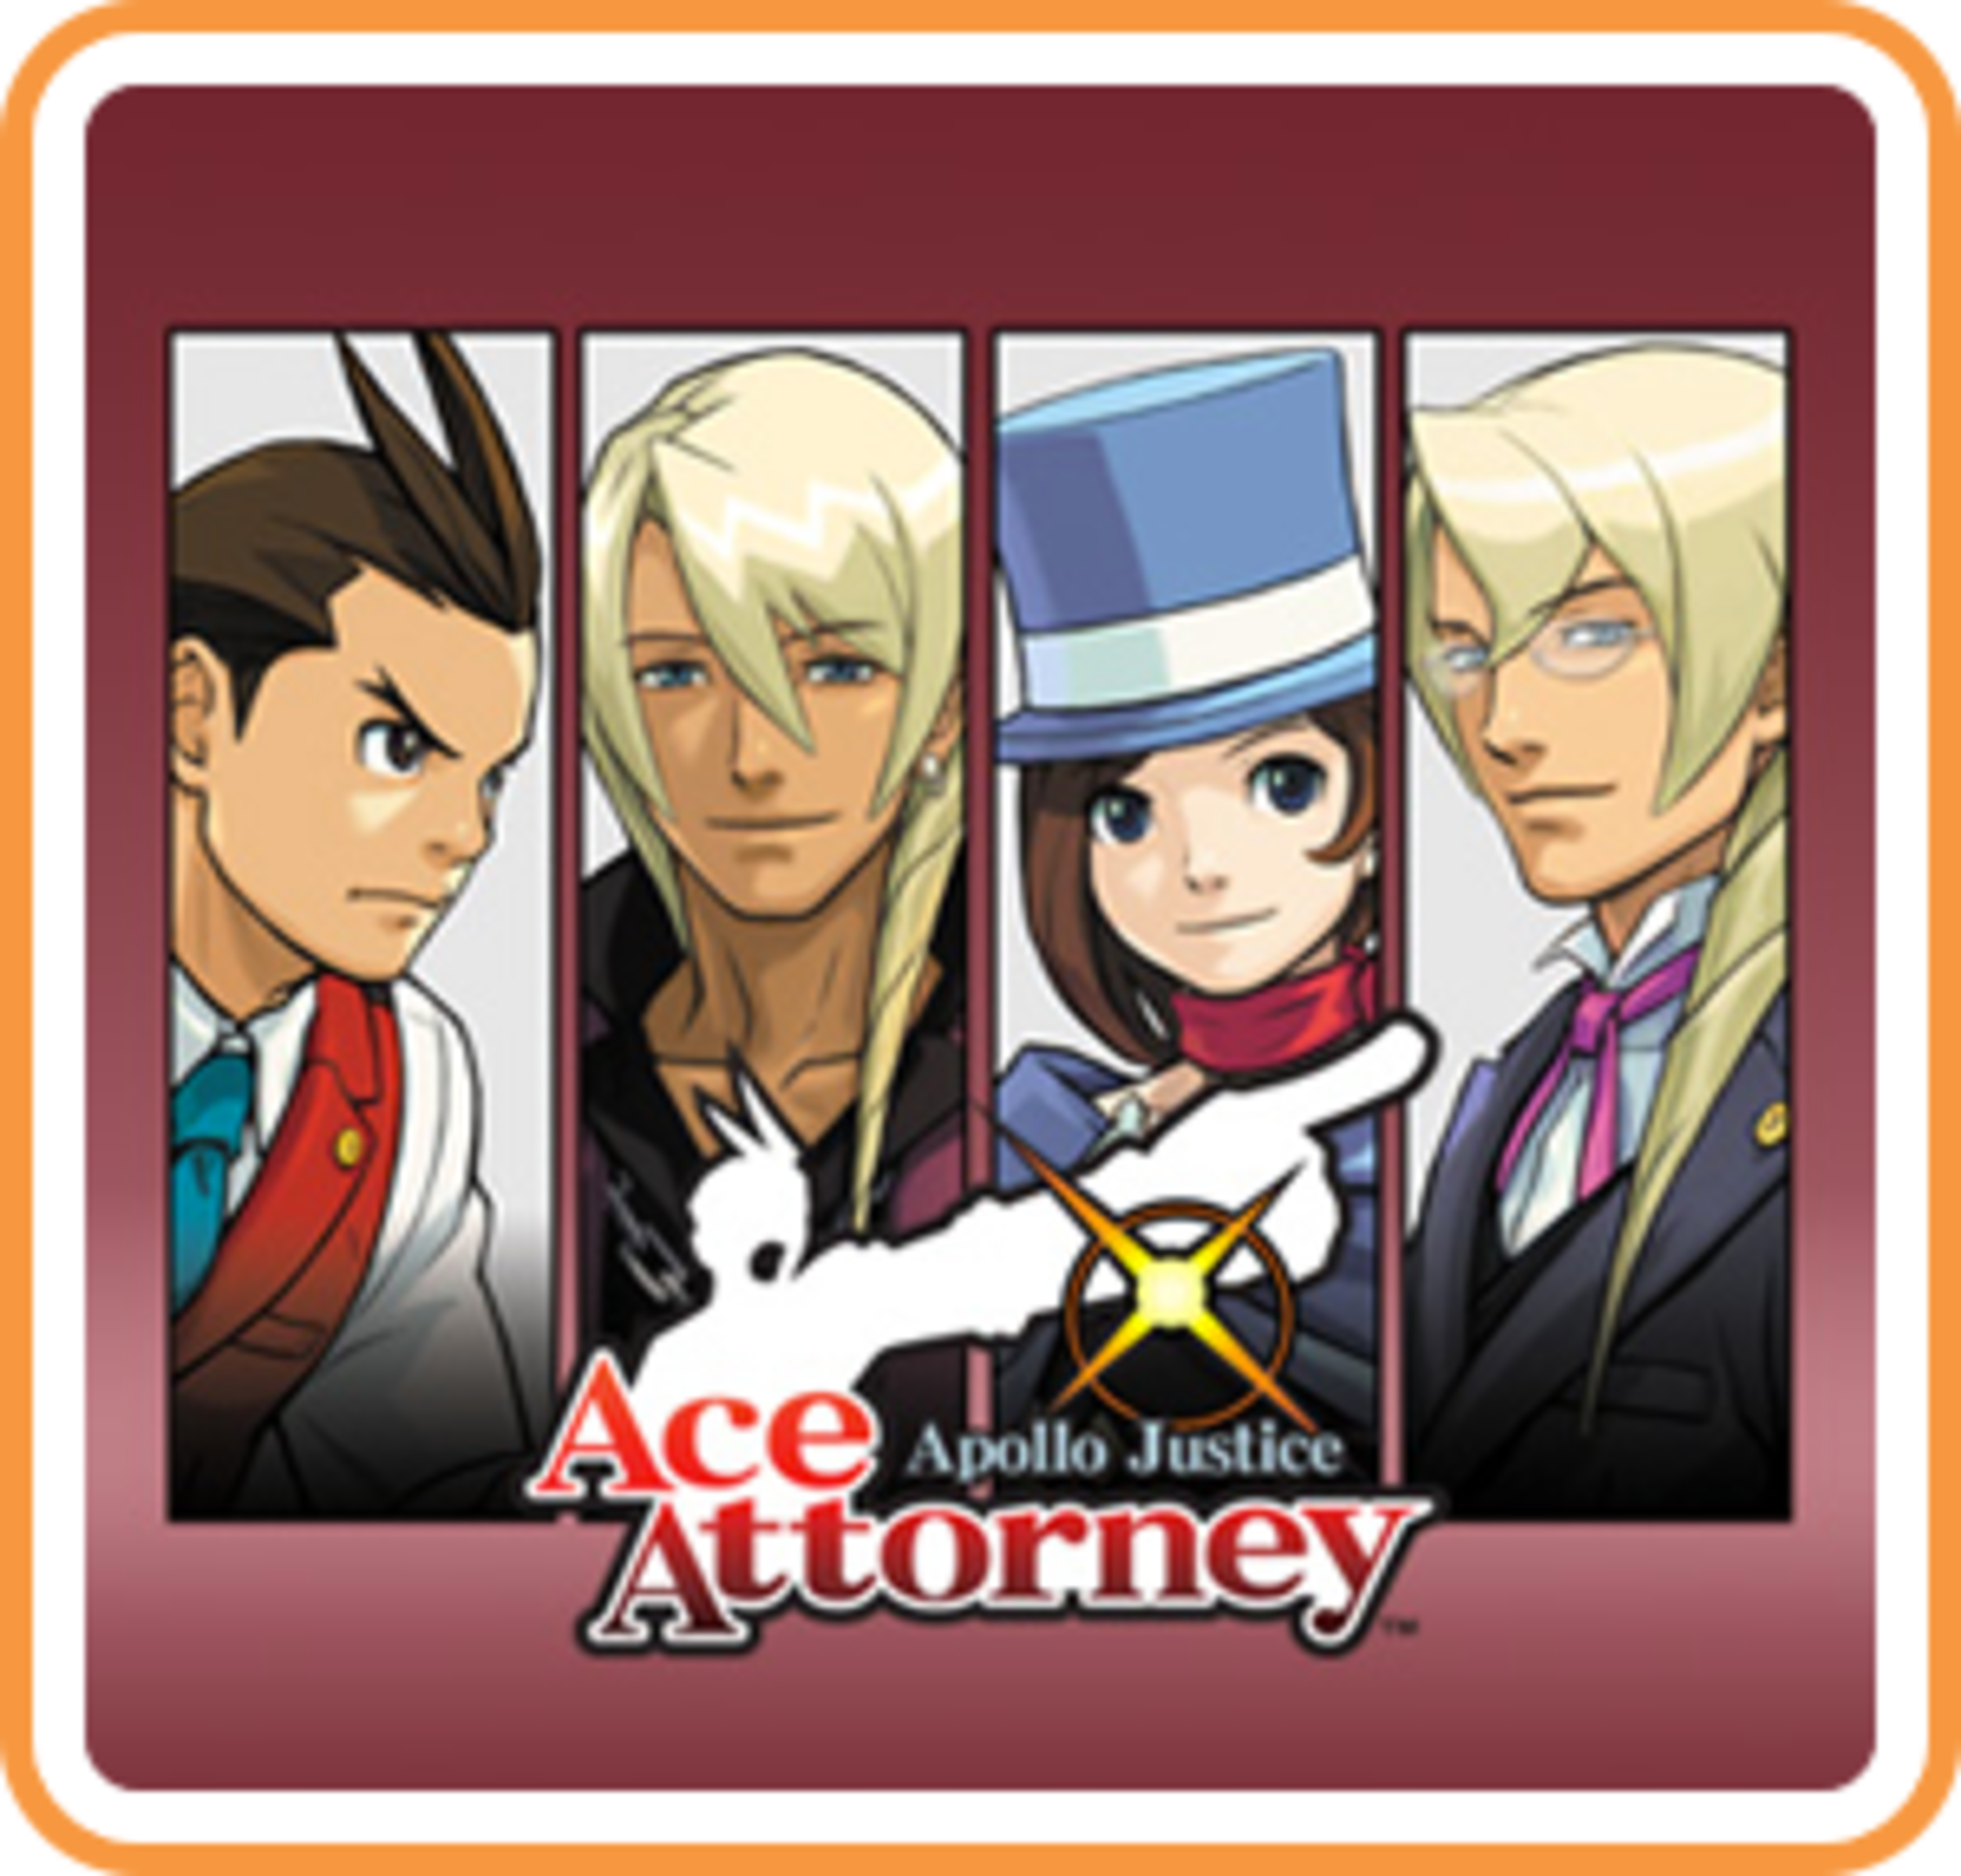 Apollo Justice: Ace Attorney For Nintendo 3Ds - Nintendo Official Site